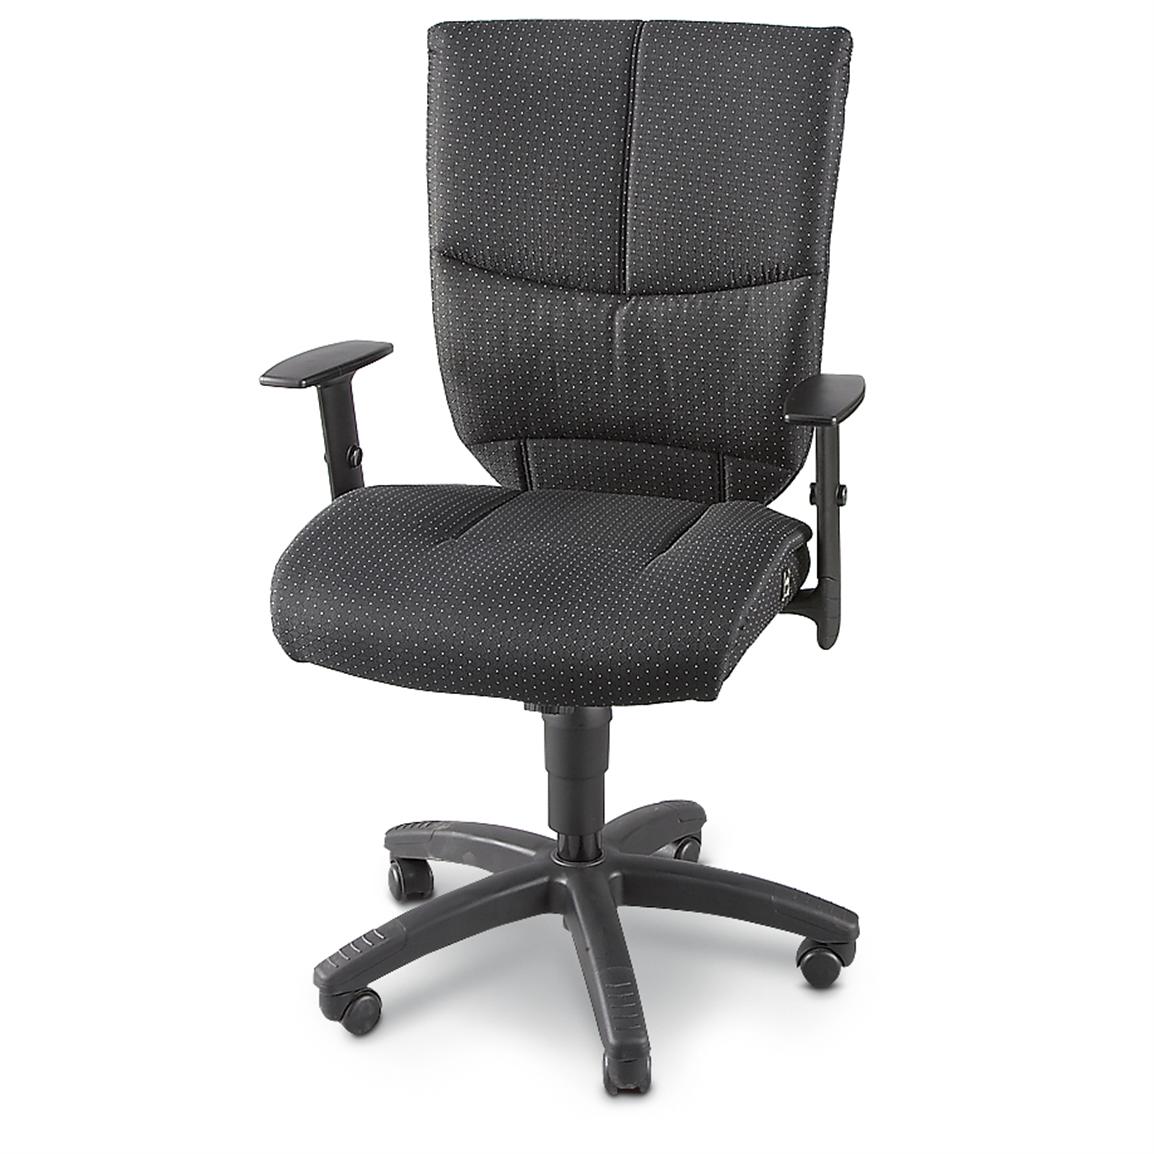 sealy-posturepedic-task-chair-black-183980-office-at-sportsman-s-guide